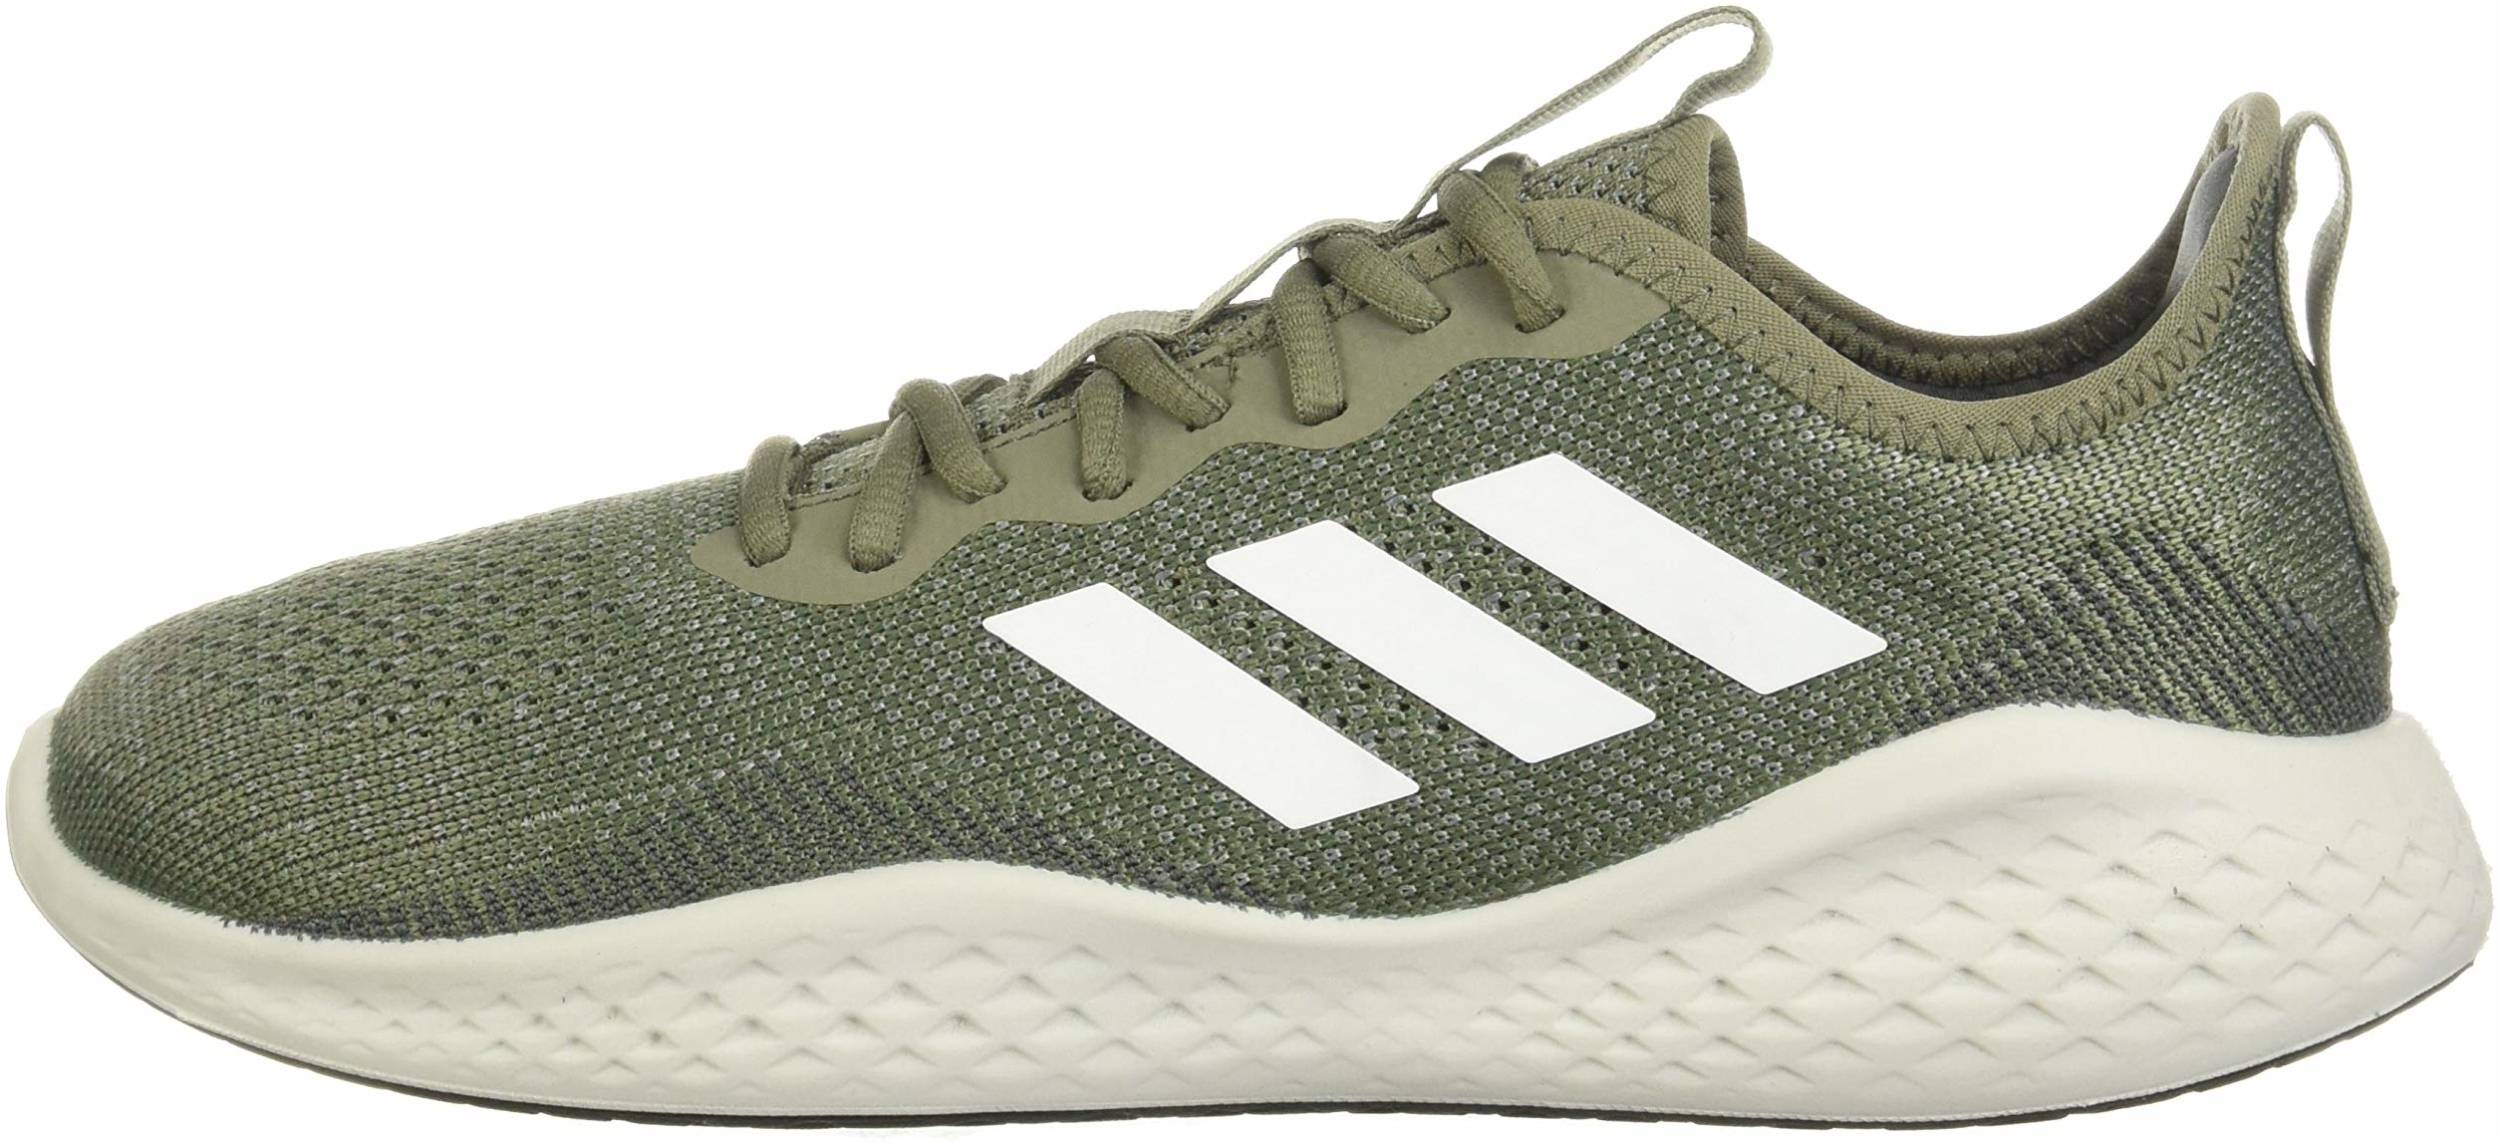 green and white adidas running shoes